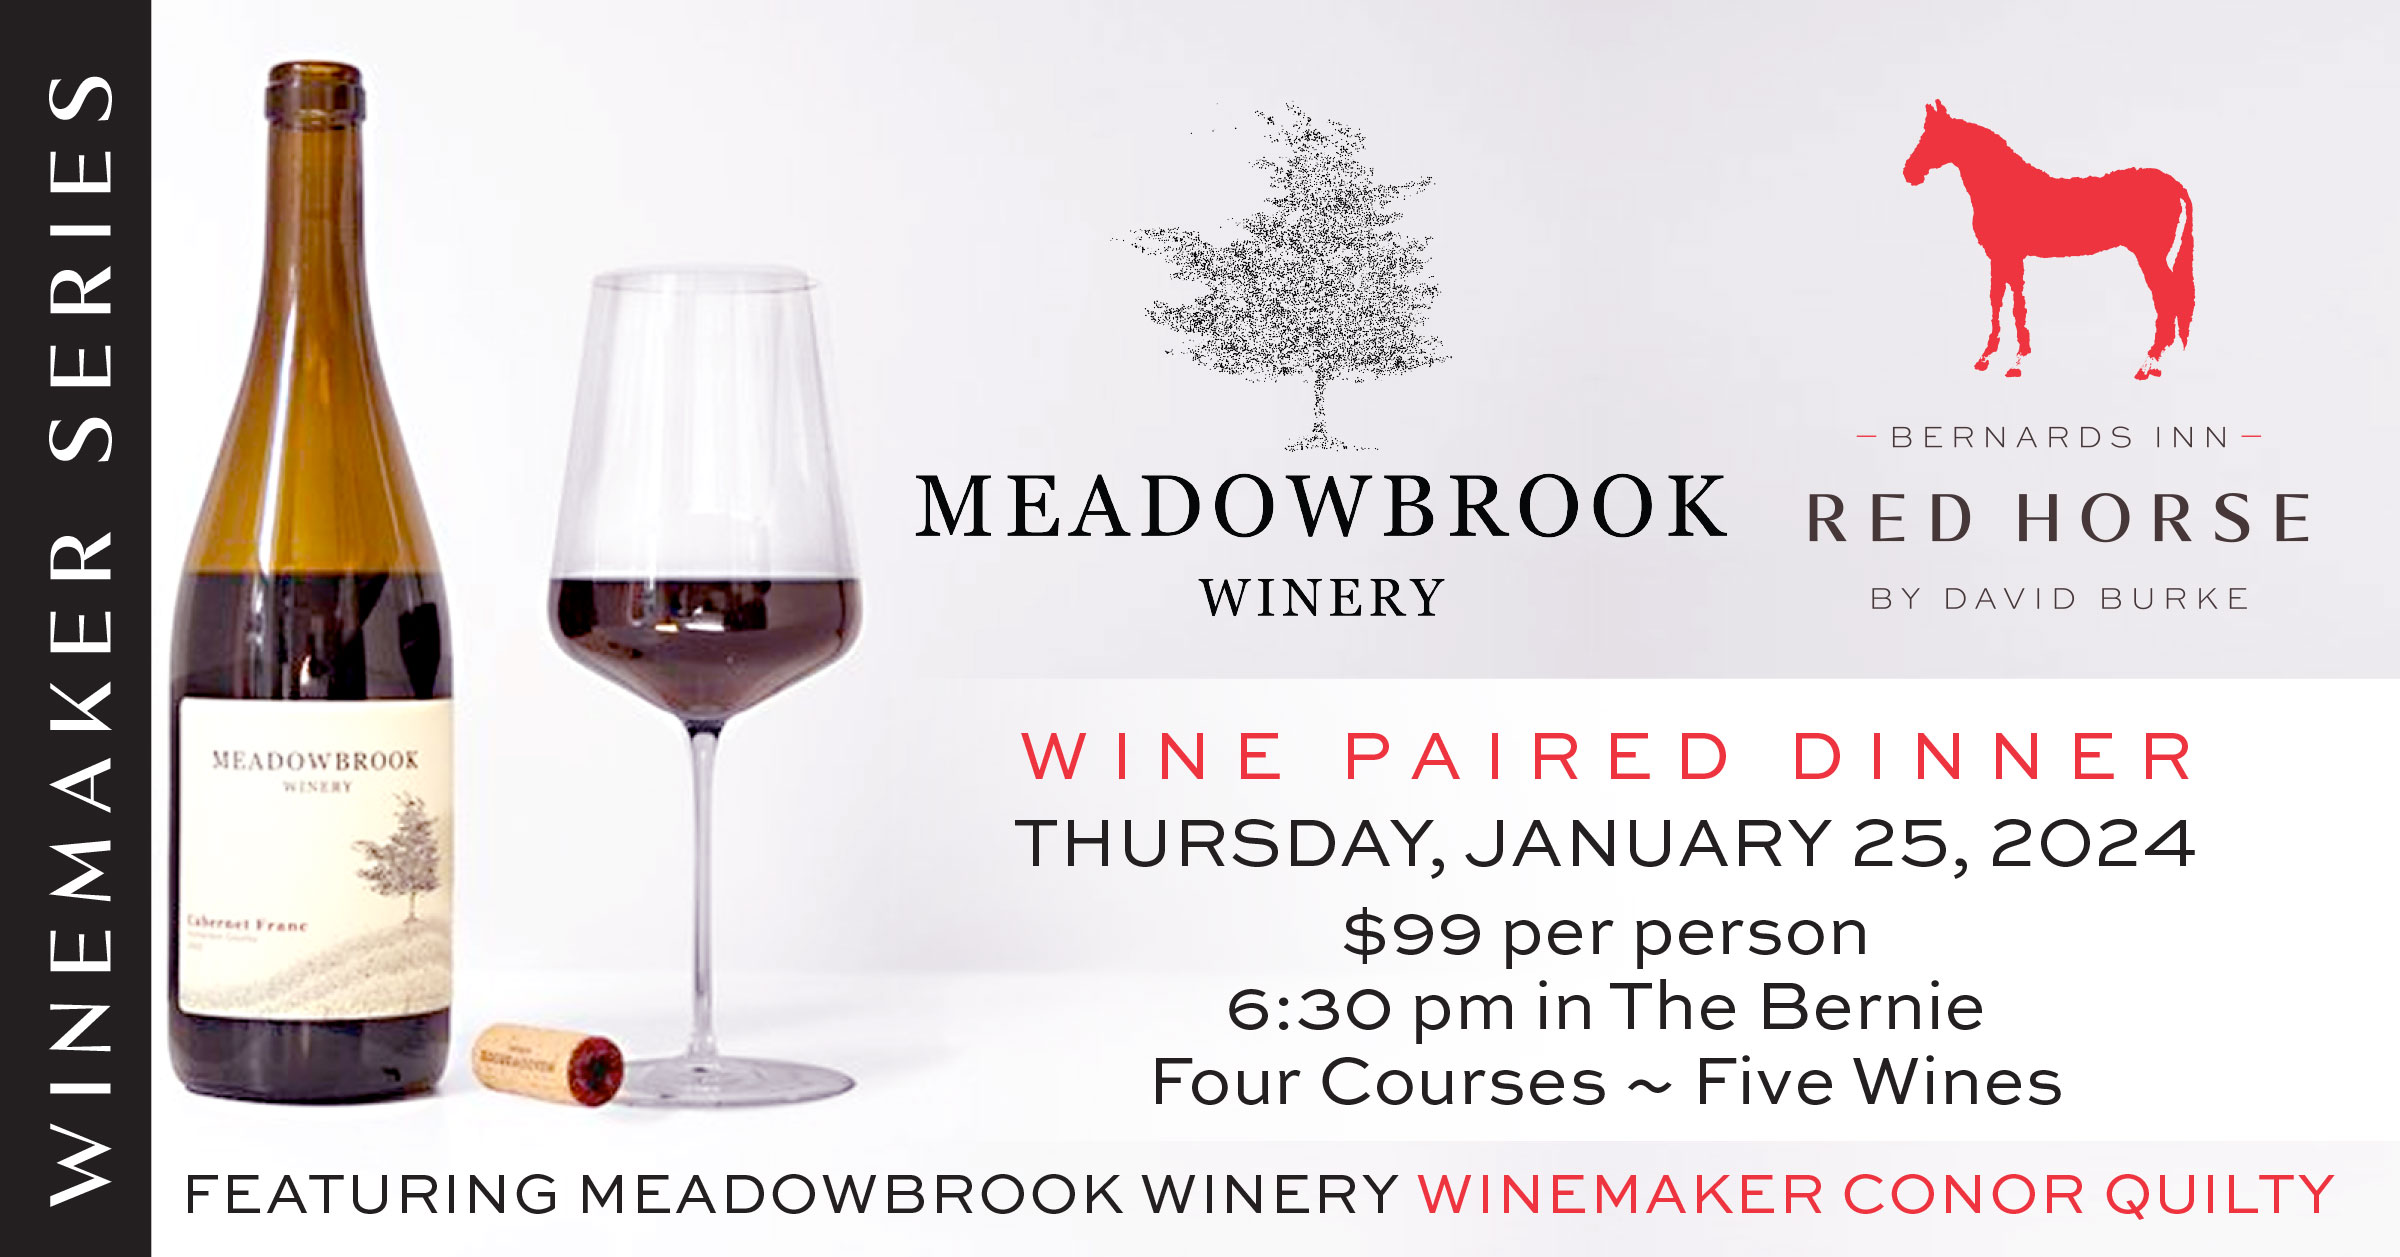 Meadowbrook Winery Wine Paired Dinner at Red Horse Bernards Inn